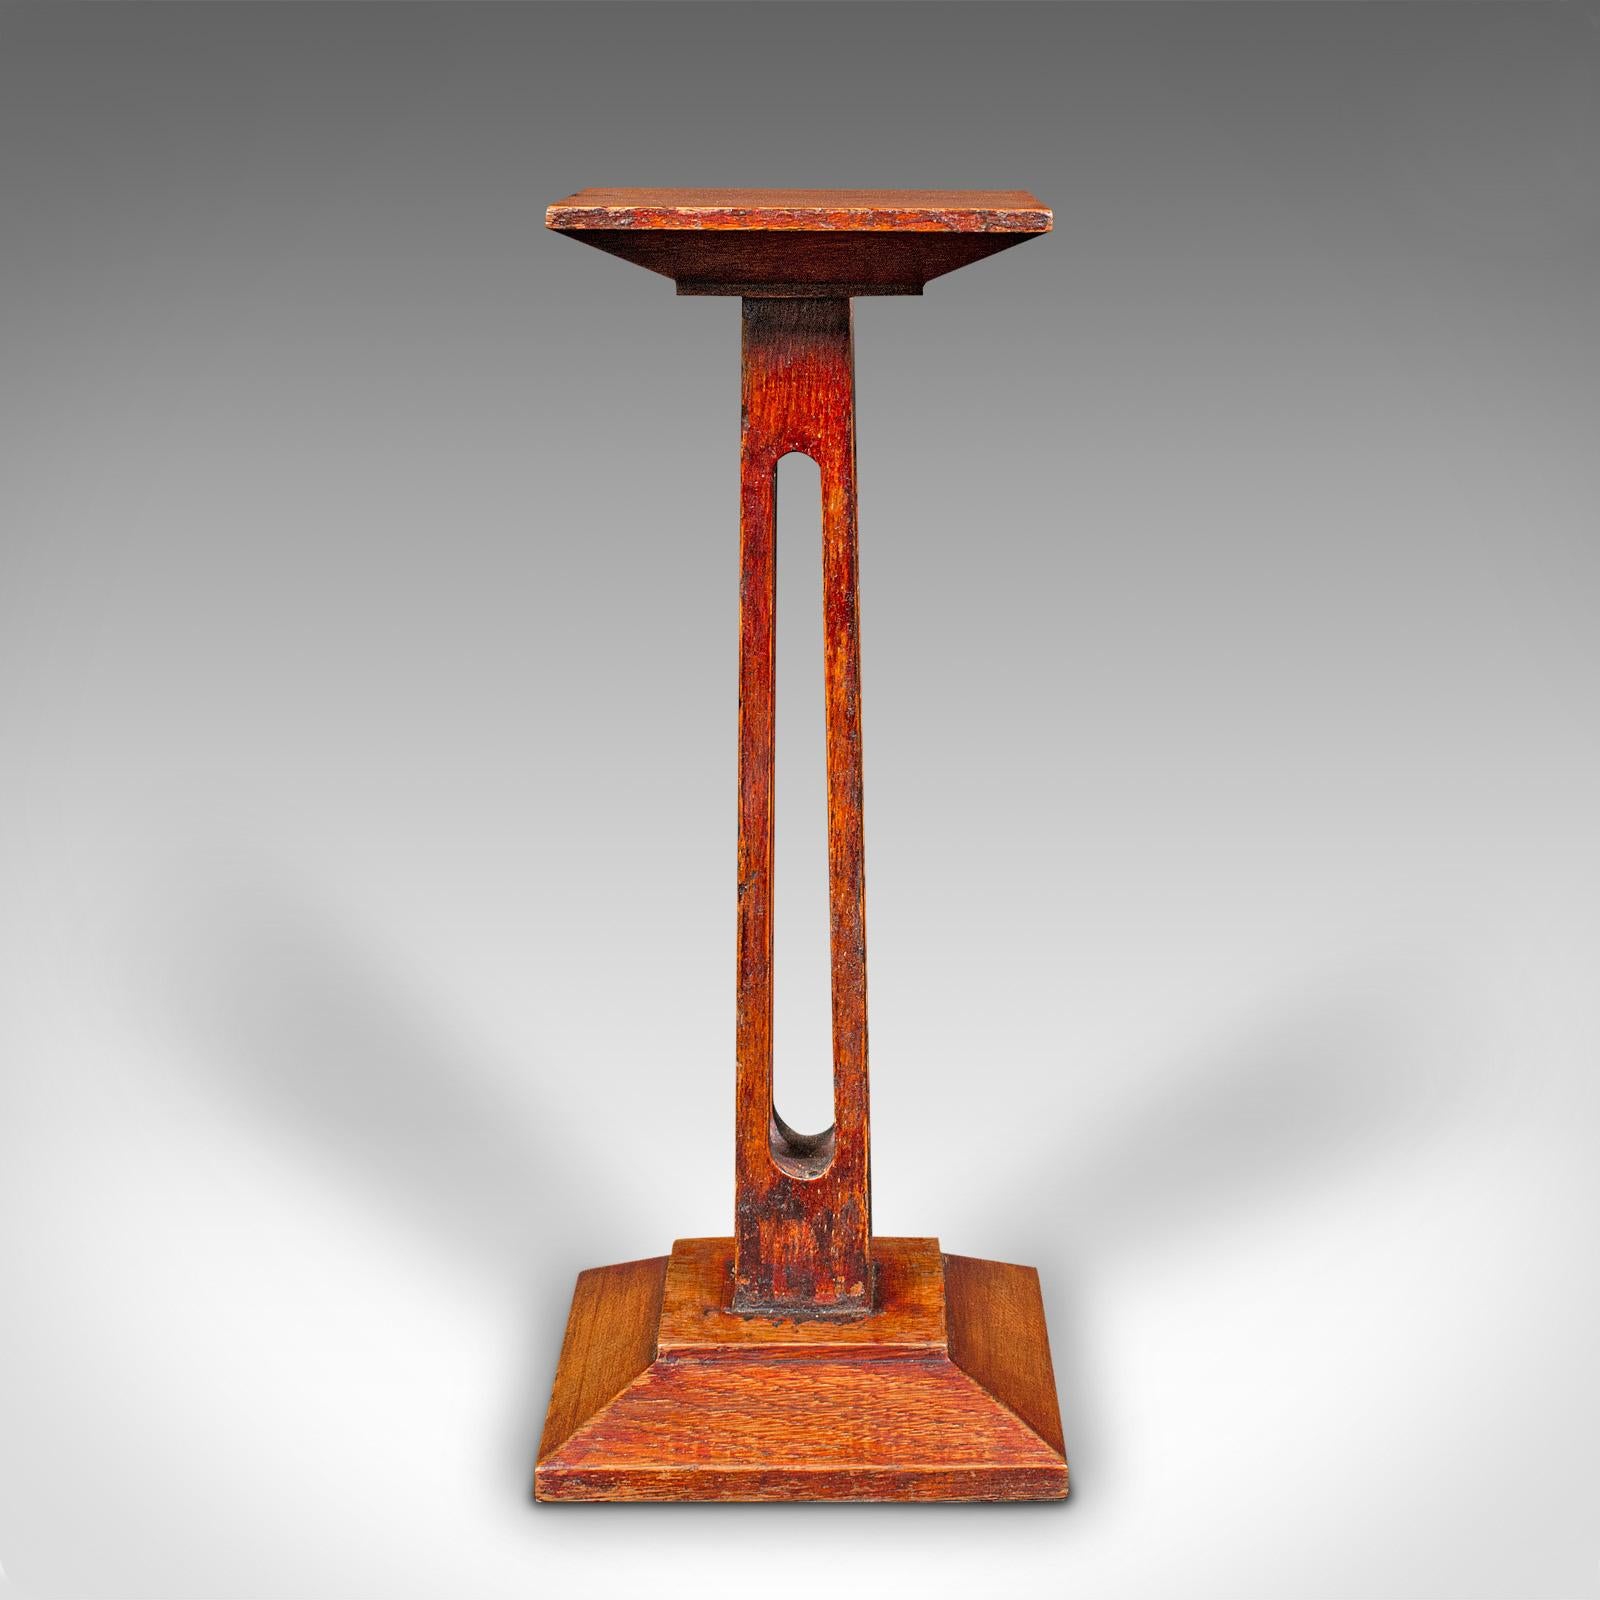 This is a small antique statue stand. An English, oak pedestal or torchere column, dating to the late Victorian period, circa 1890.

Present small objects or statues in excellent Victorian taste
Displays a desirable aged patina and in good